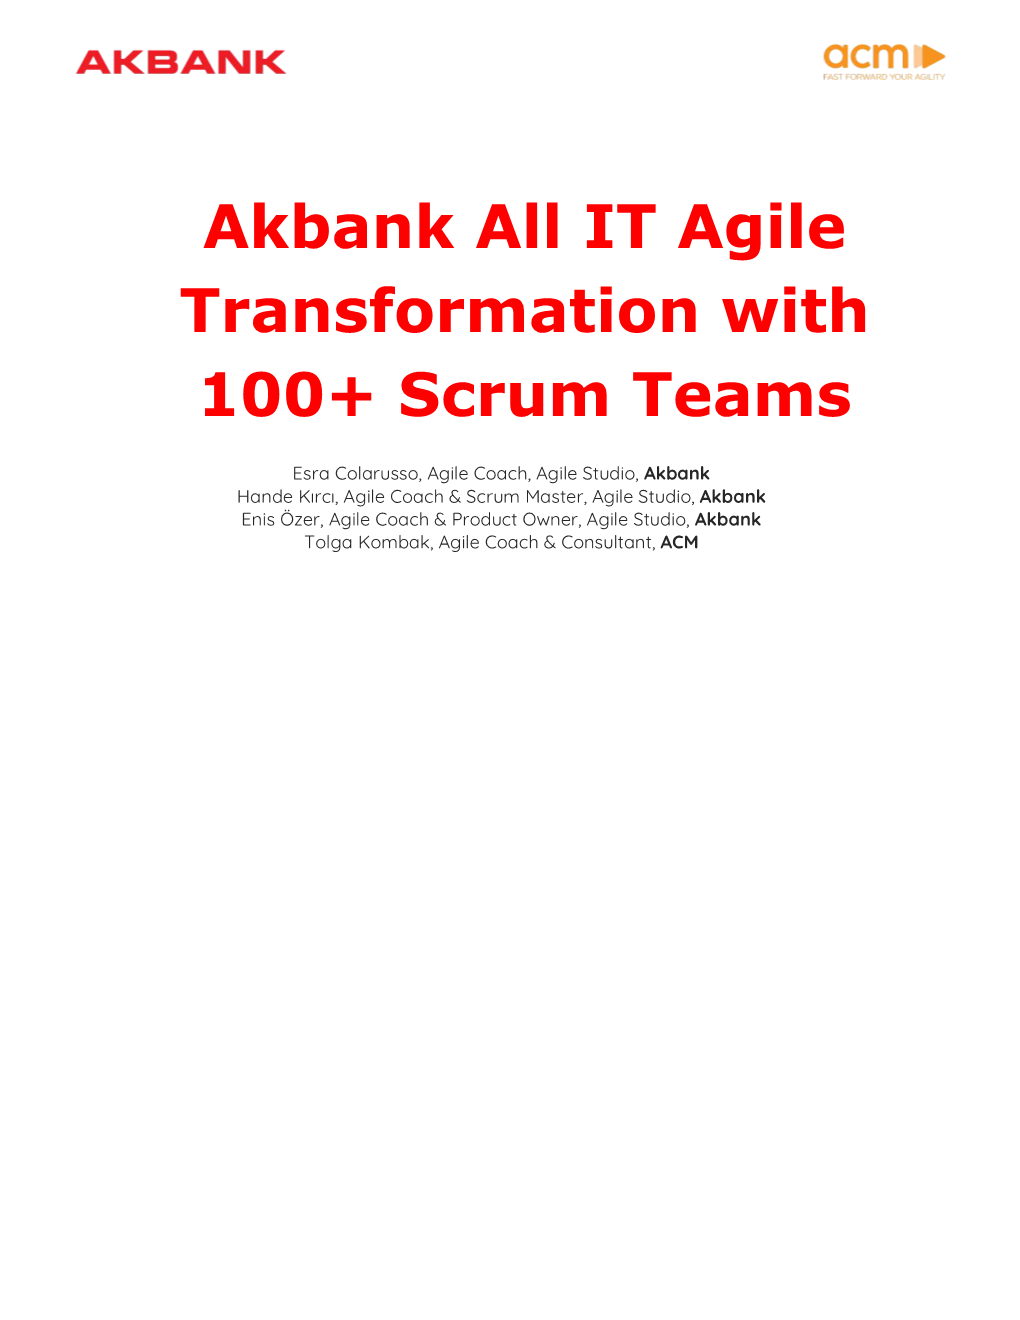 Akbank All IT Agile Transformation with 100+ Scrum Teams